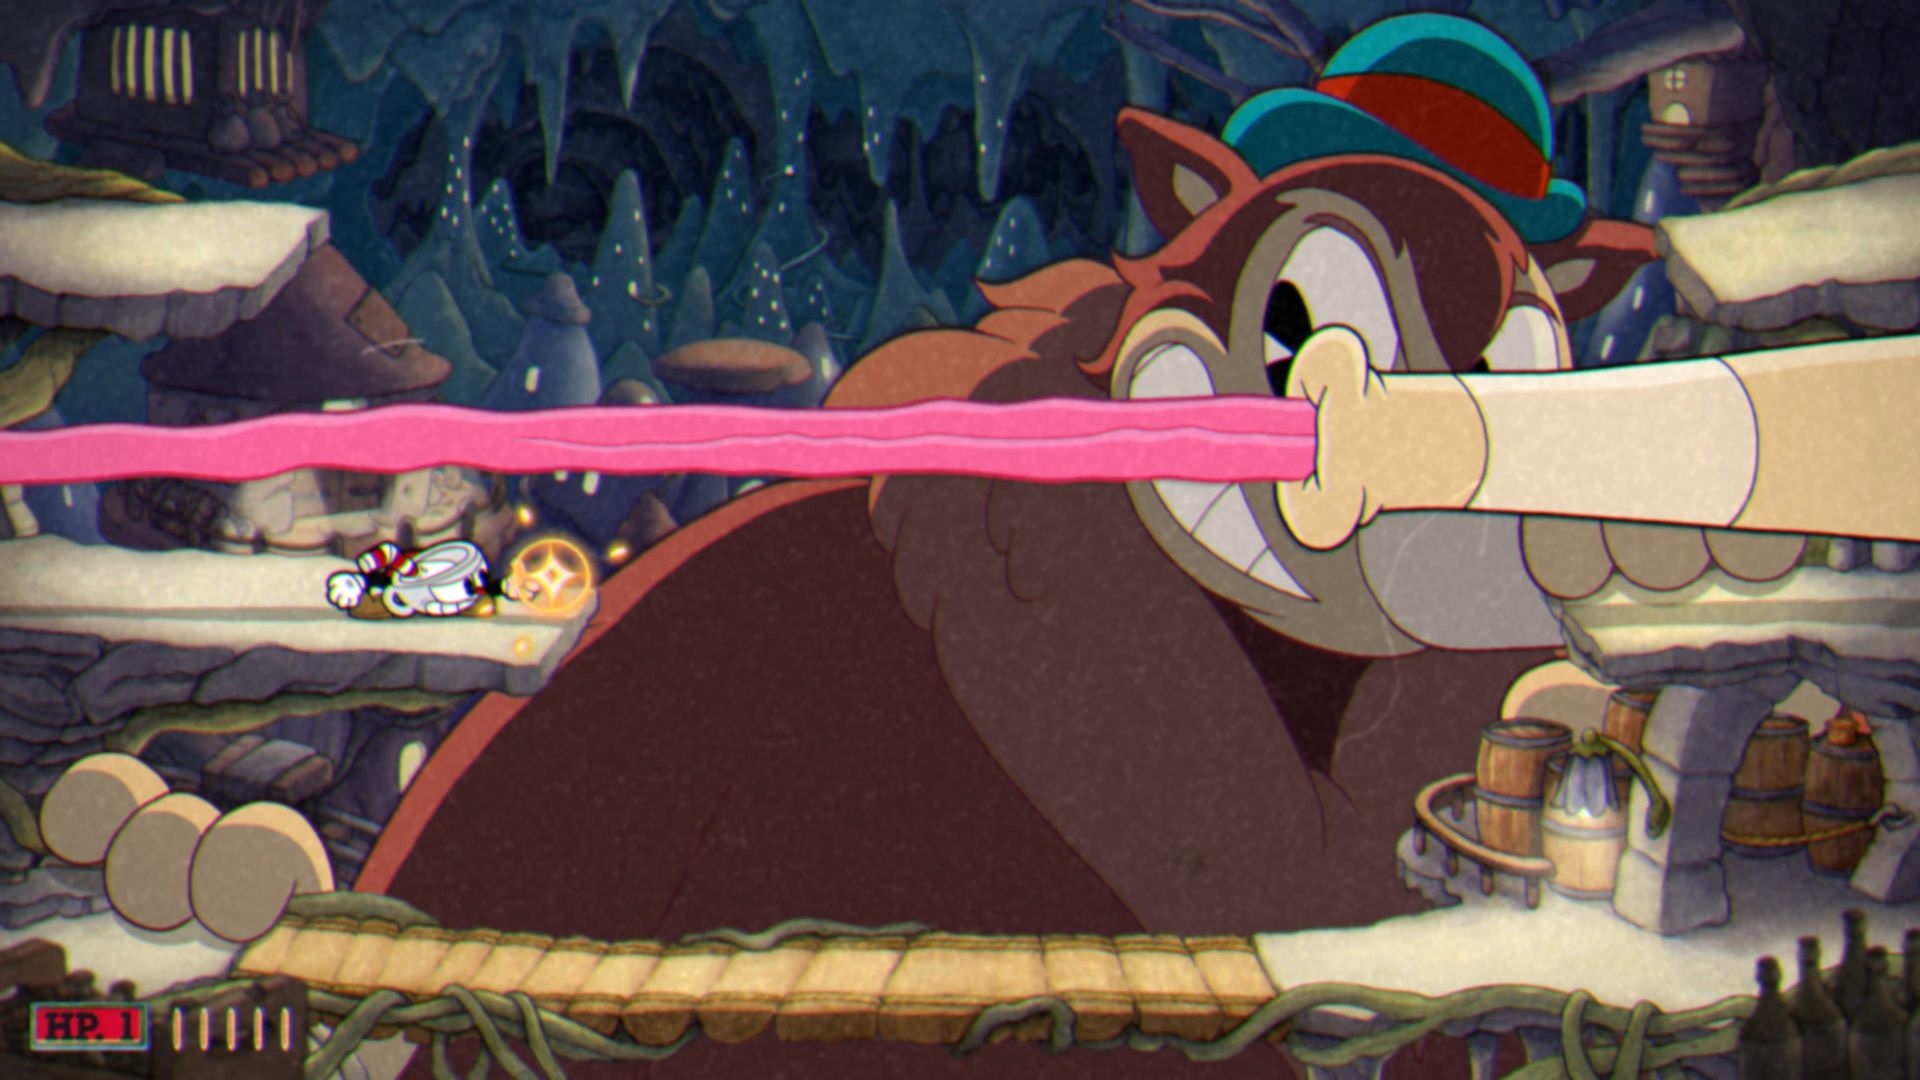 Cuphead The Delicious Course, The Moonshine Mob, Ducking under the Anteater's tongue